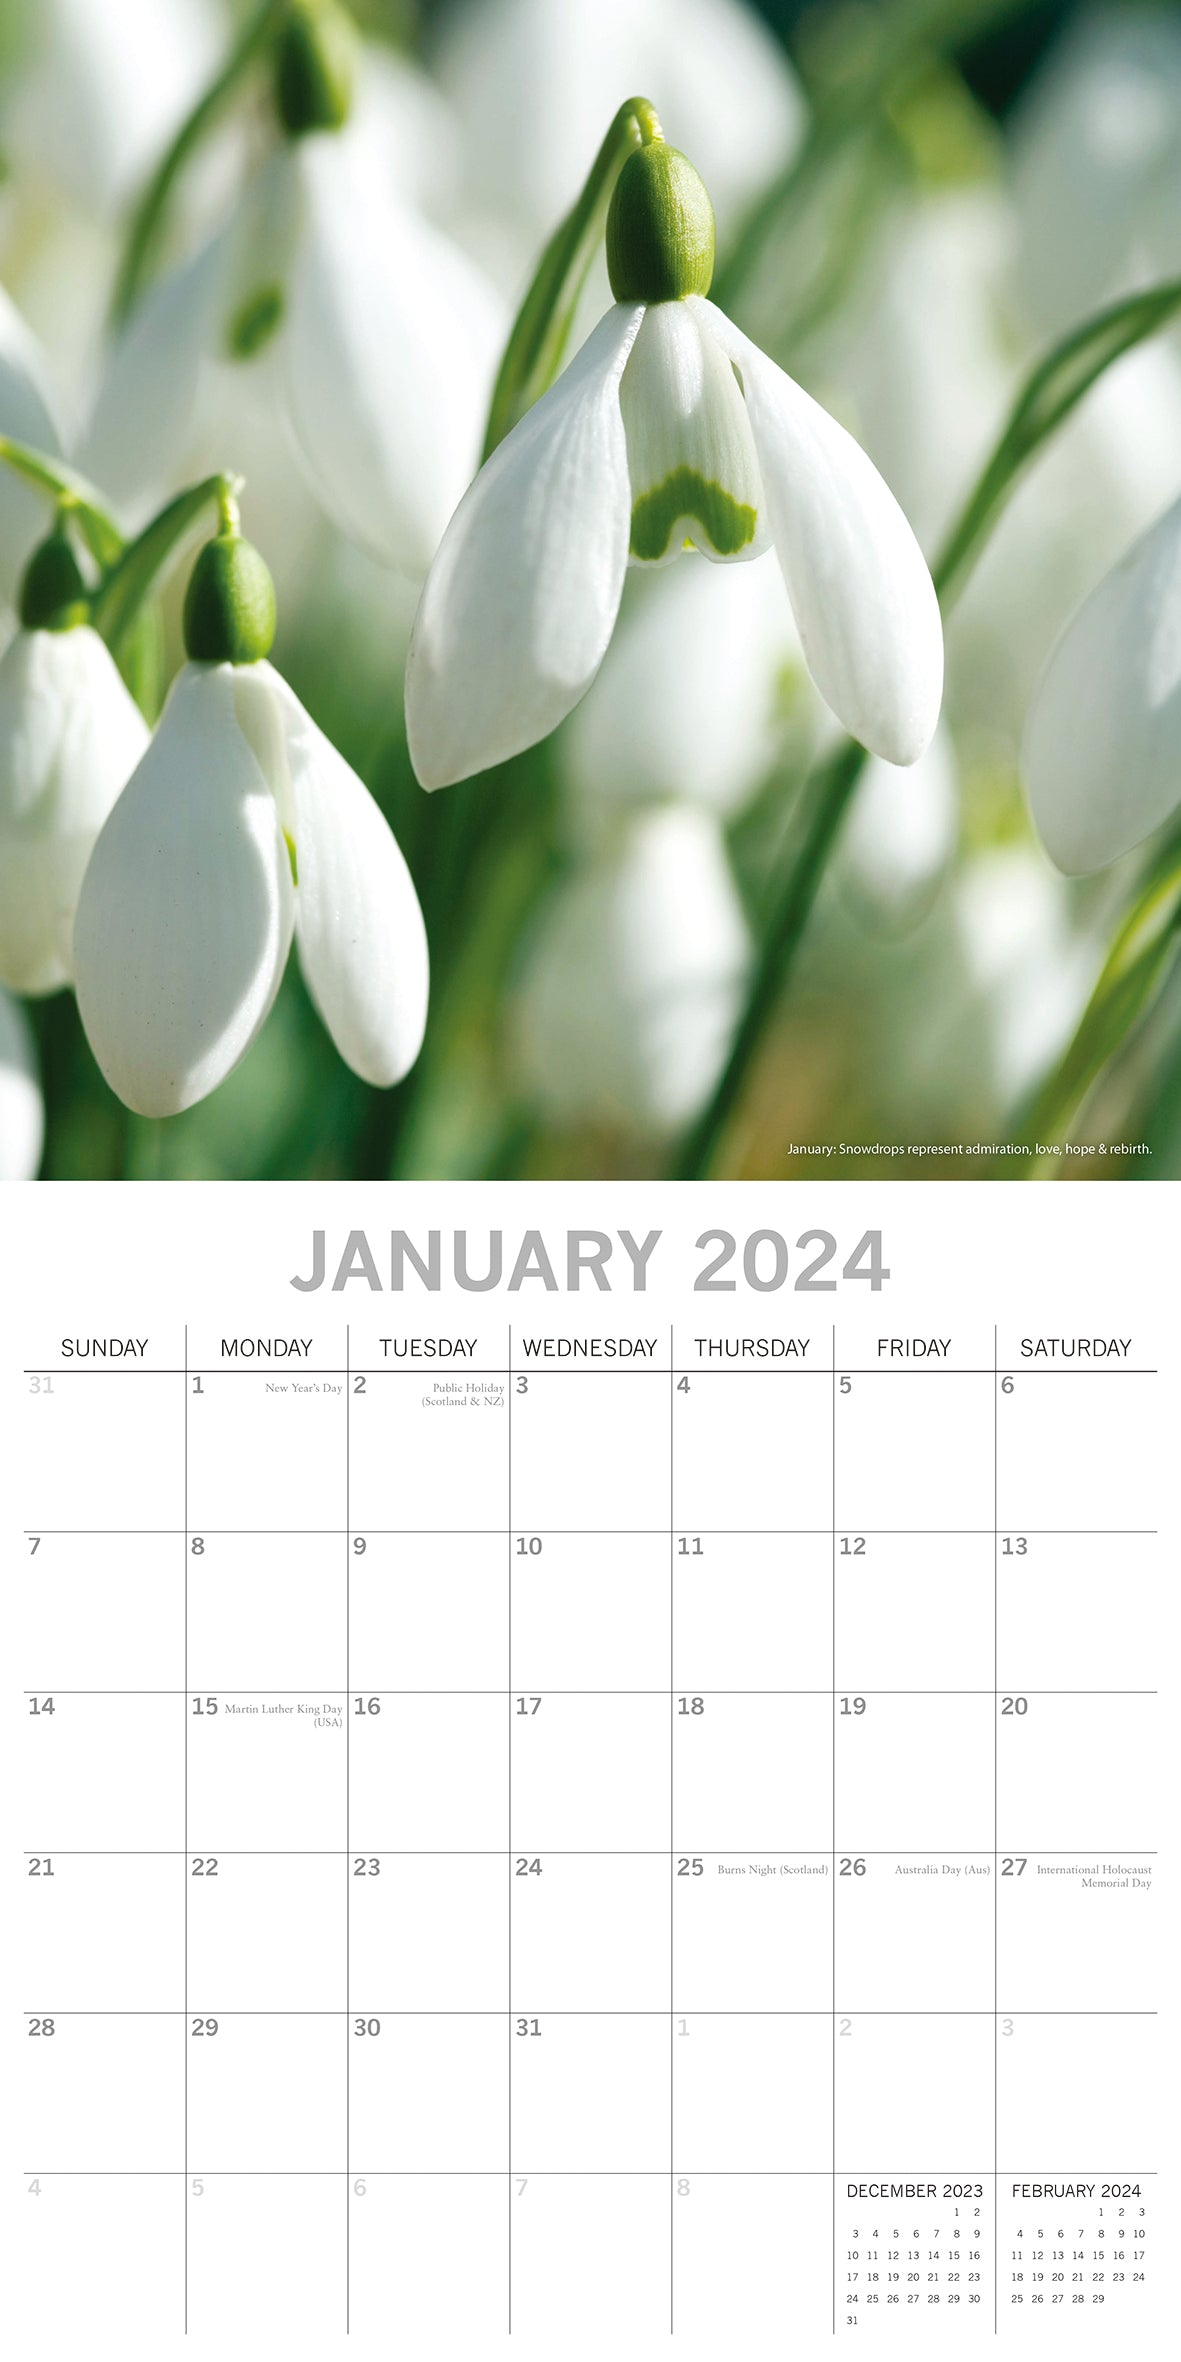 Flower of the Month - 2024 Square Wall Calendar 16 Months Floral Planner Gift